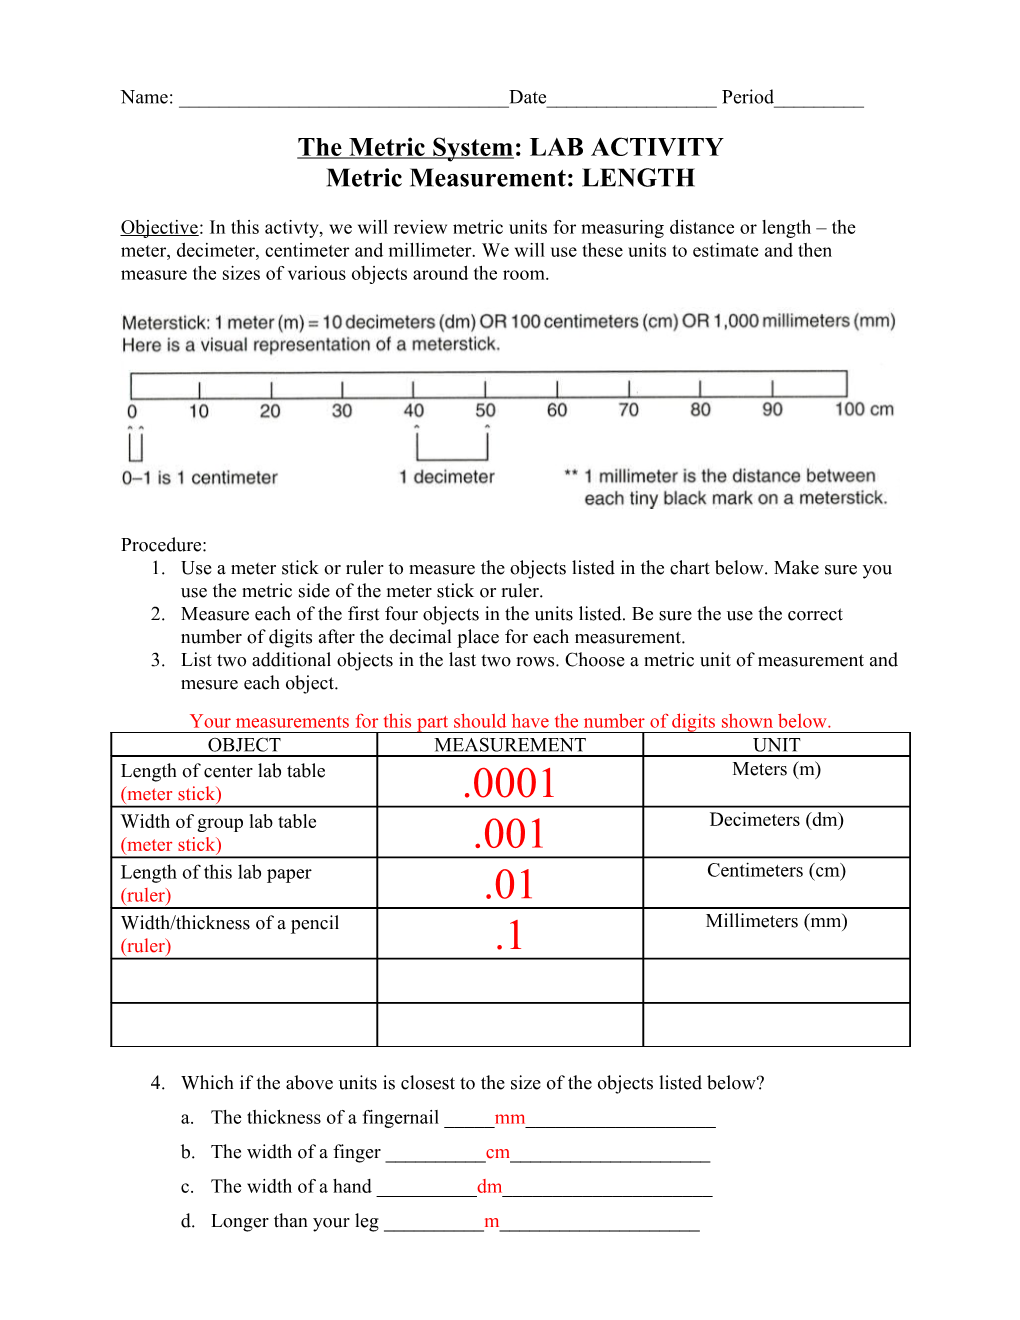 The Metric System: LAB ACTIVITY